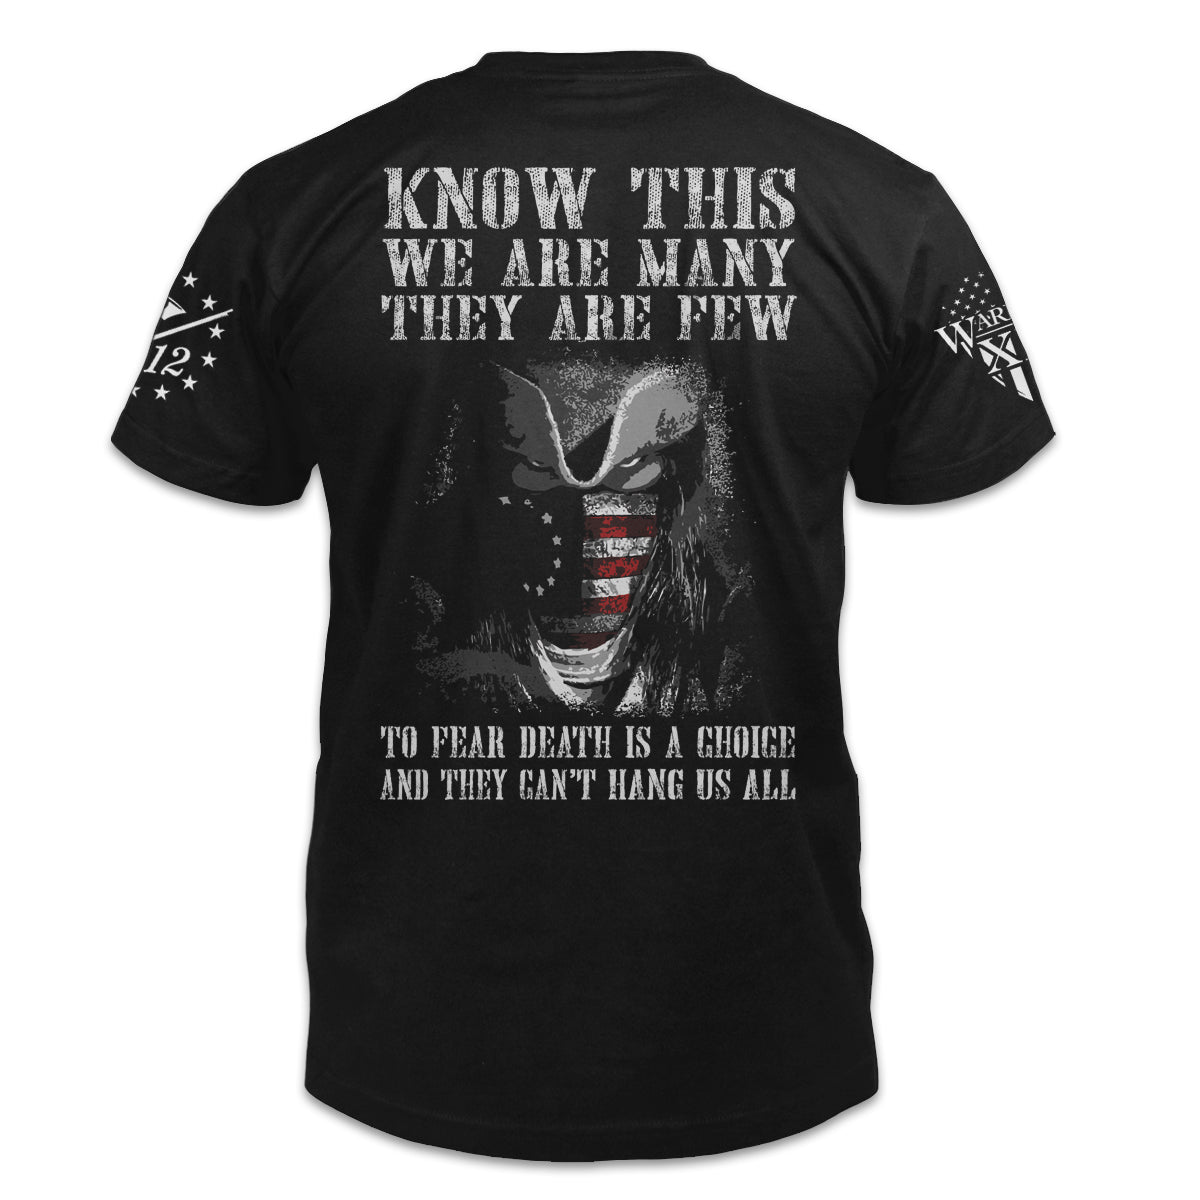 A black t-shirt with the words, "Know This, We Are Many They Are Few. To Fear Death Is A Choice, And They Can't Hang Us All" printed on the back of the shirt.